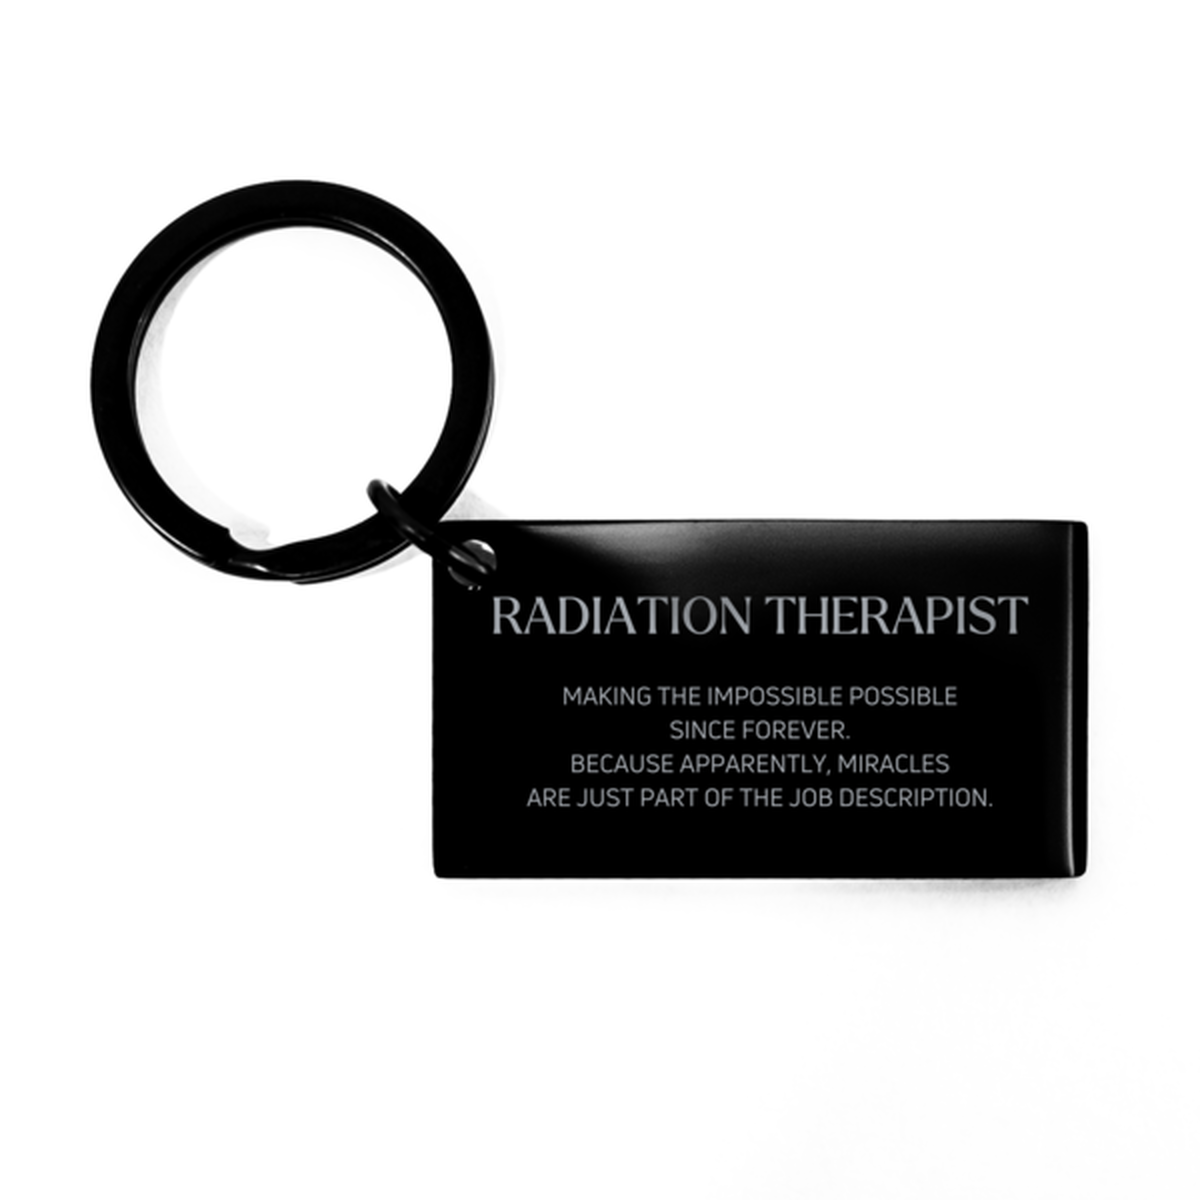 Funny Radiation Therapist Gifts, Miracles are just part of the job description, Inspirational Birthday Keychain For Radiation Therapist, Men, Women, Coworkers, Friends, Boss